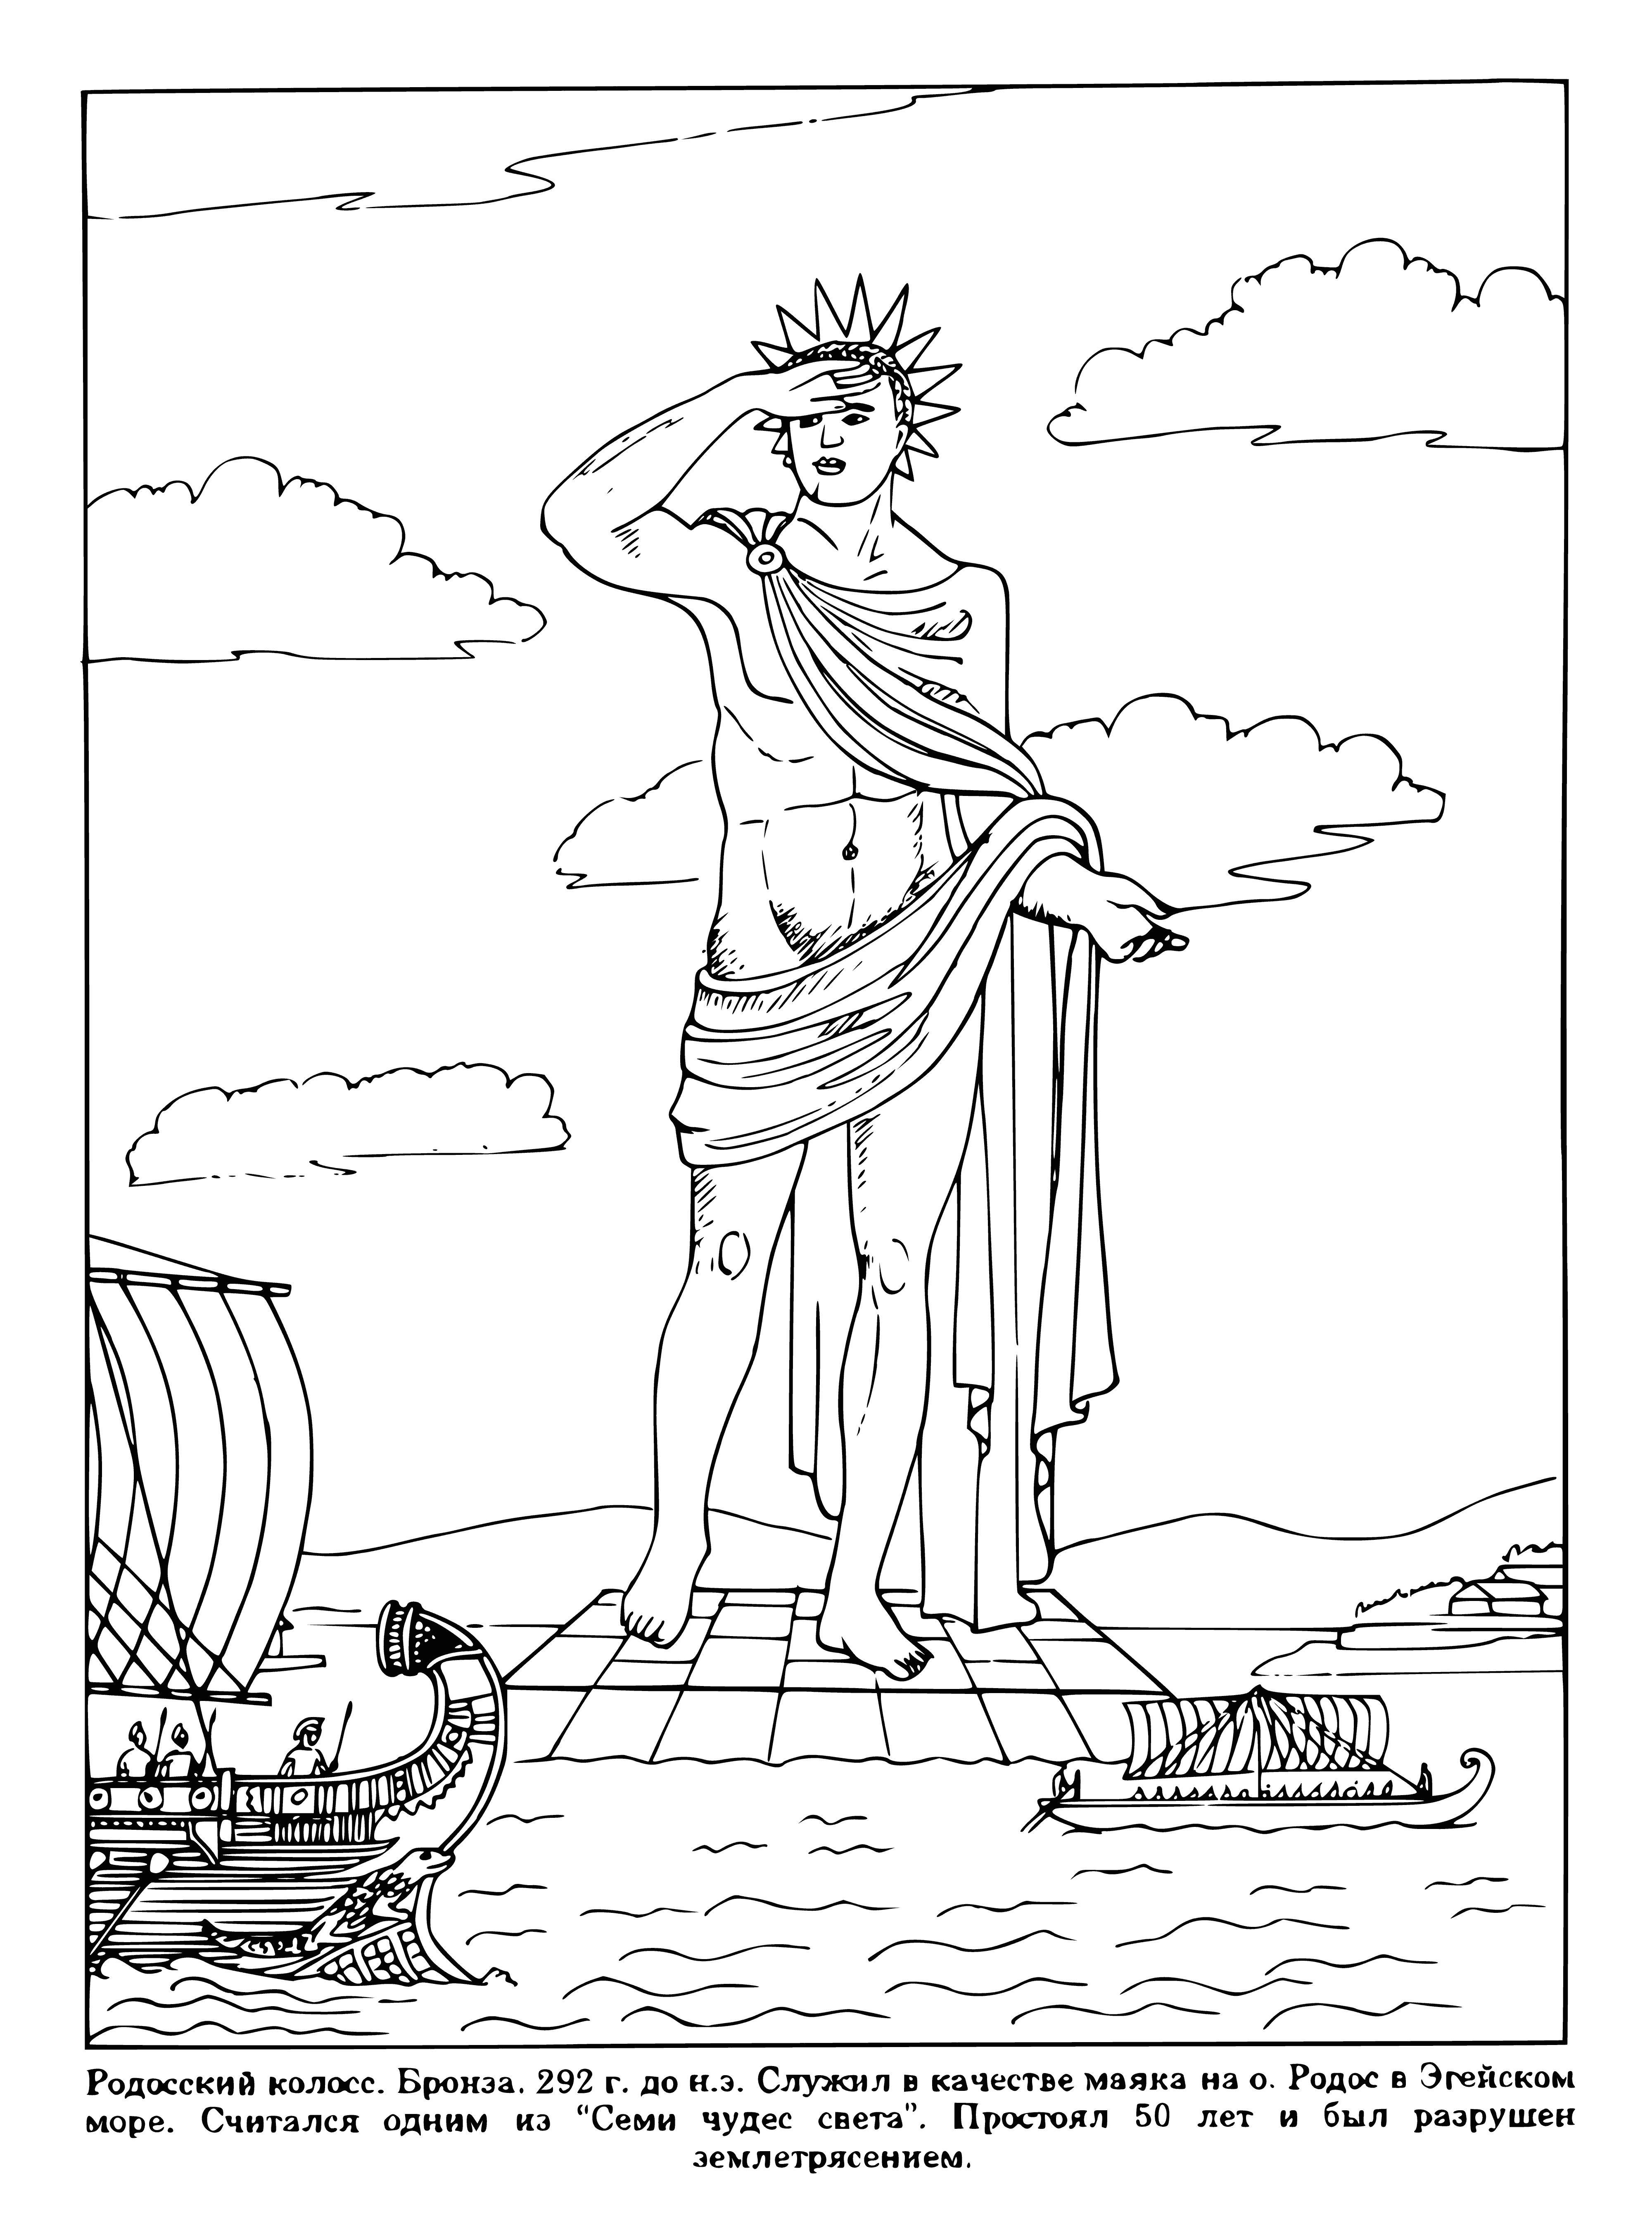 The Colossus of Rhodes coloring page